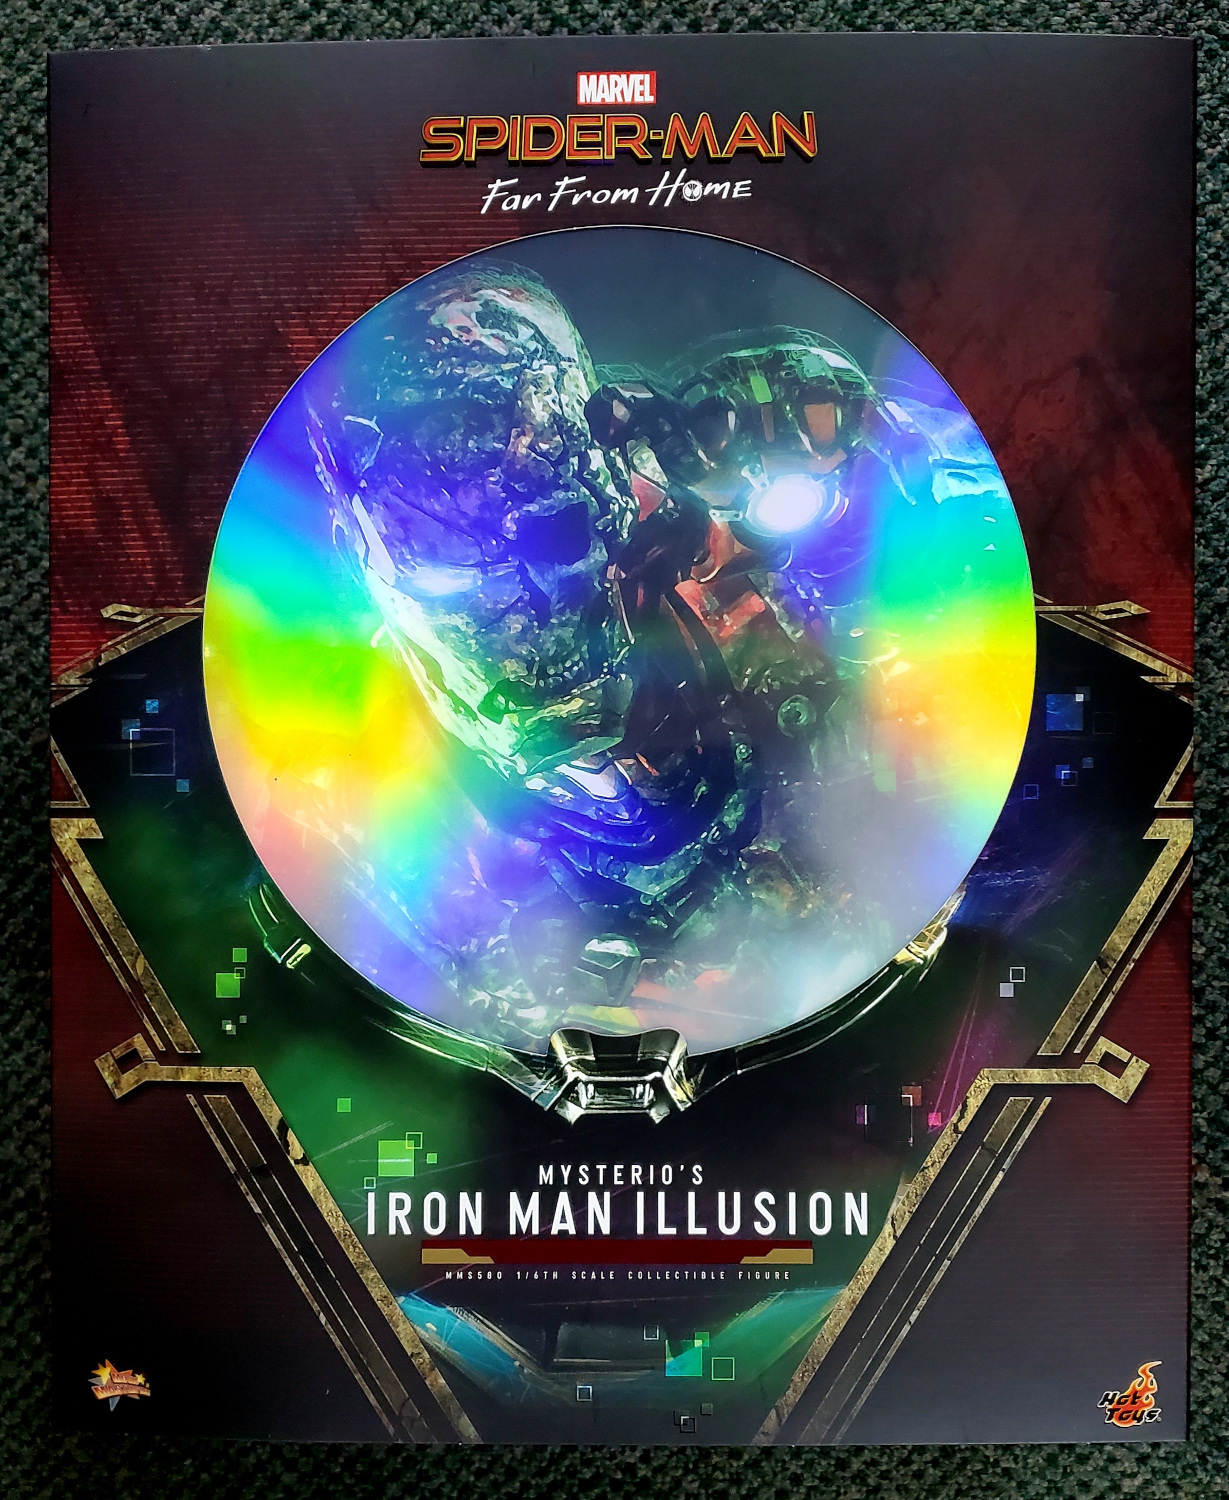 Mysterio's Iron Man Illusion Sixth Scale Figure by Hot Toys